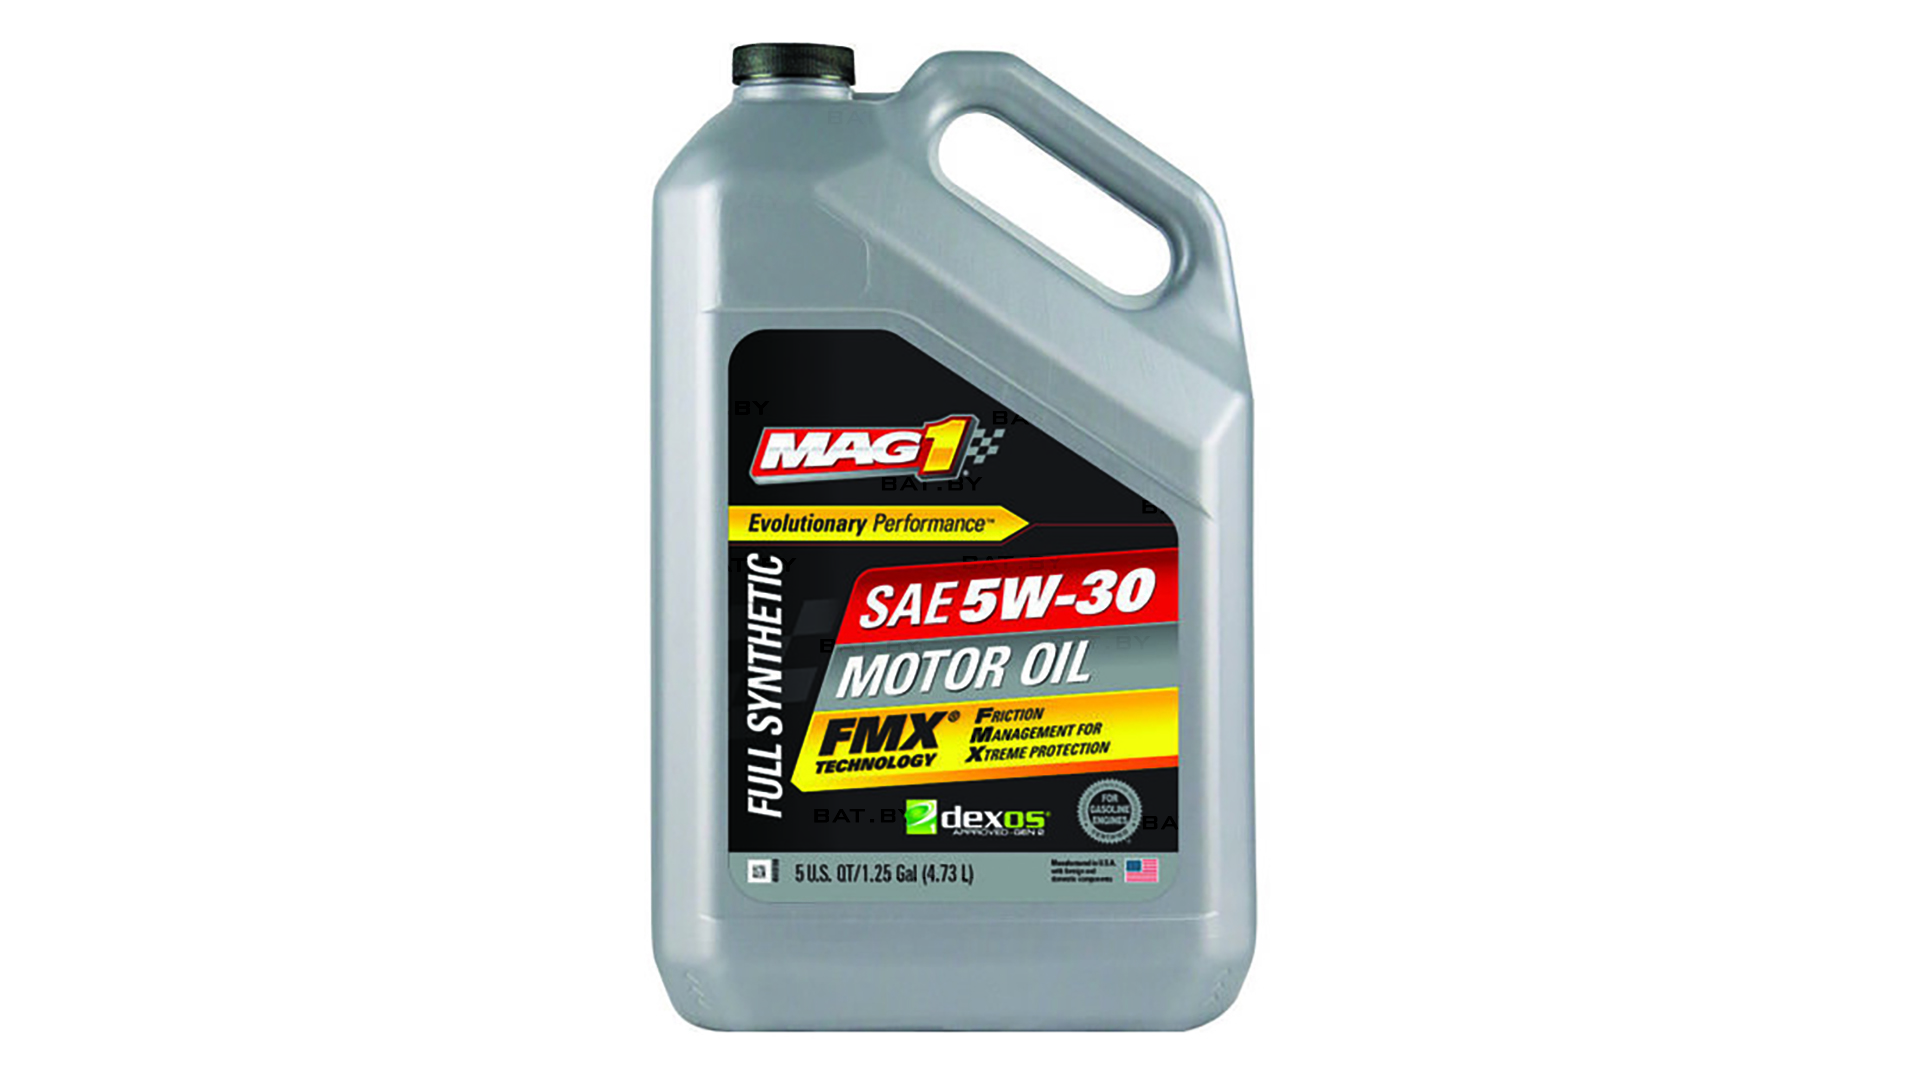 Am l 5w 30. Моторное масло mag1. Mag1 5w30. Масло mag1 5w30. Mag 1® Full Synthetic 5w-30 (4.73л).